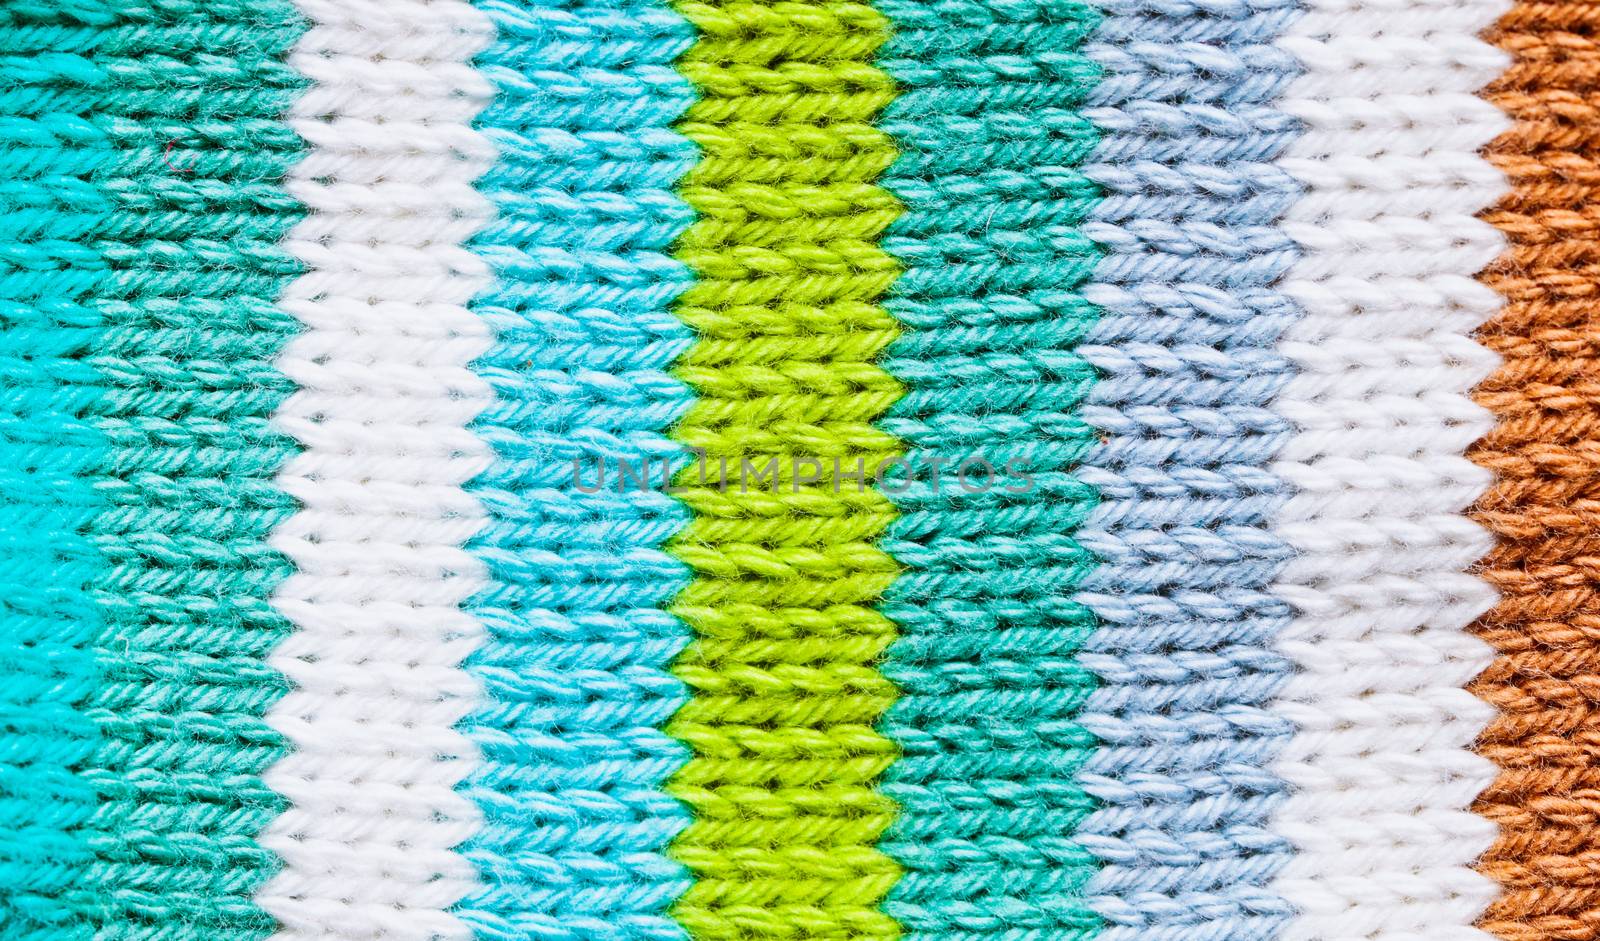 Coloful wool pattern on a child's item of clothing